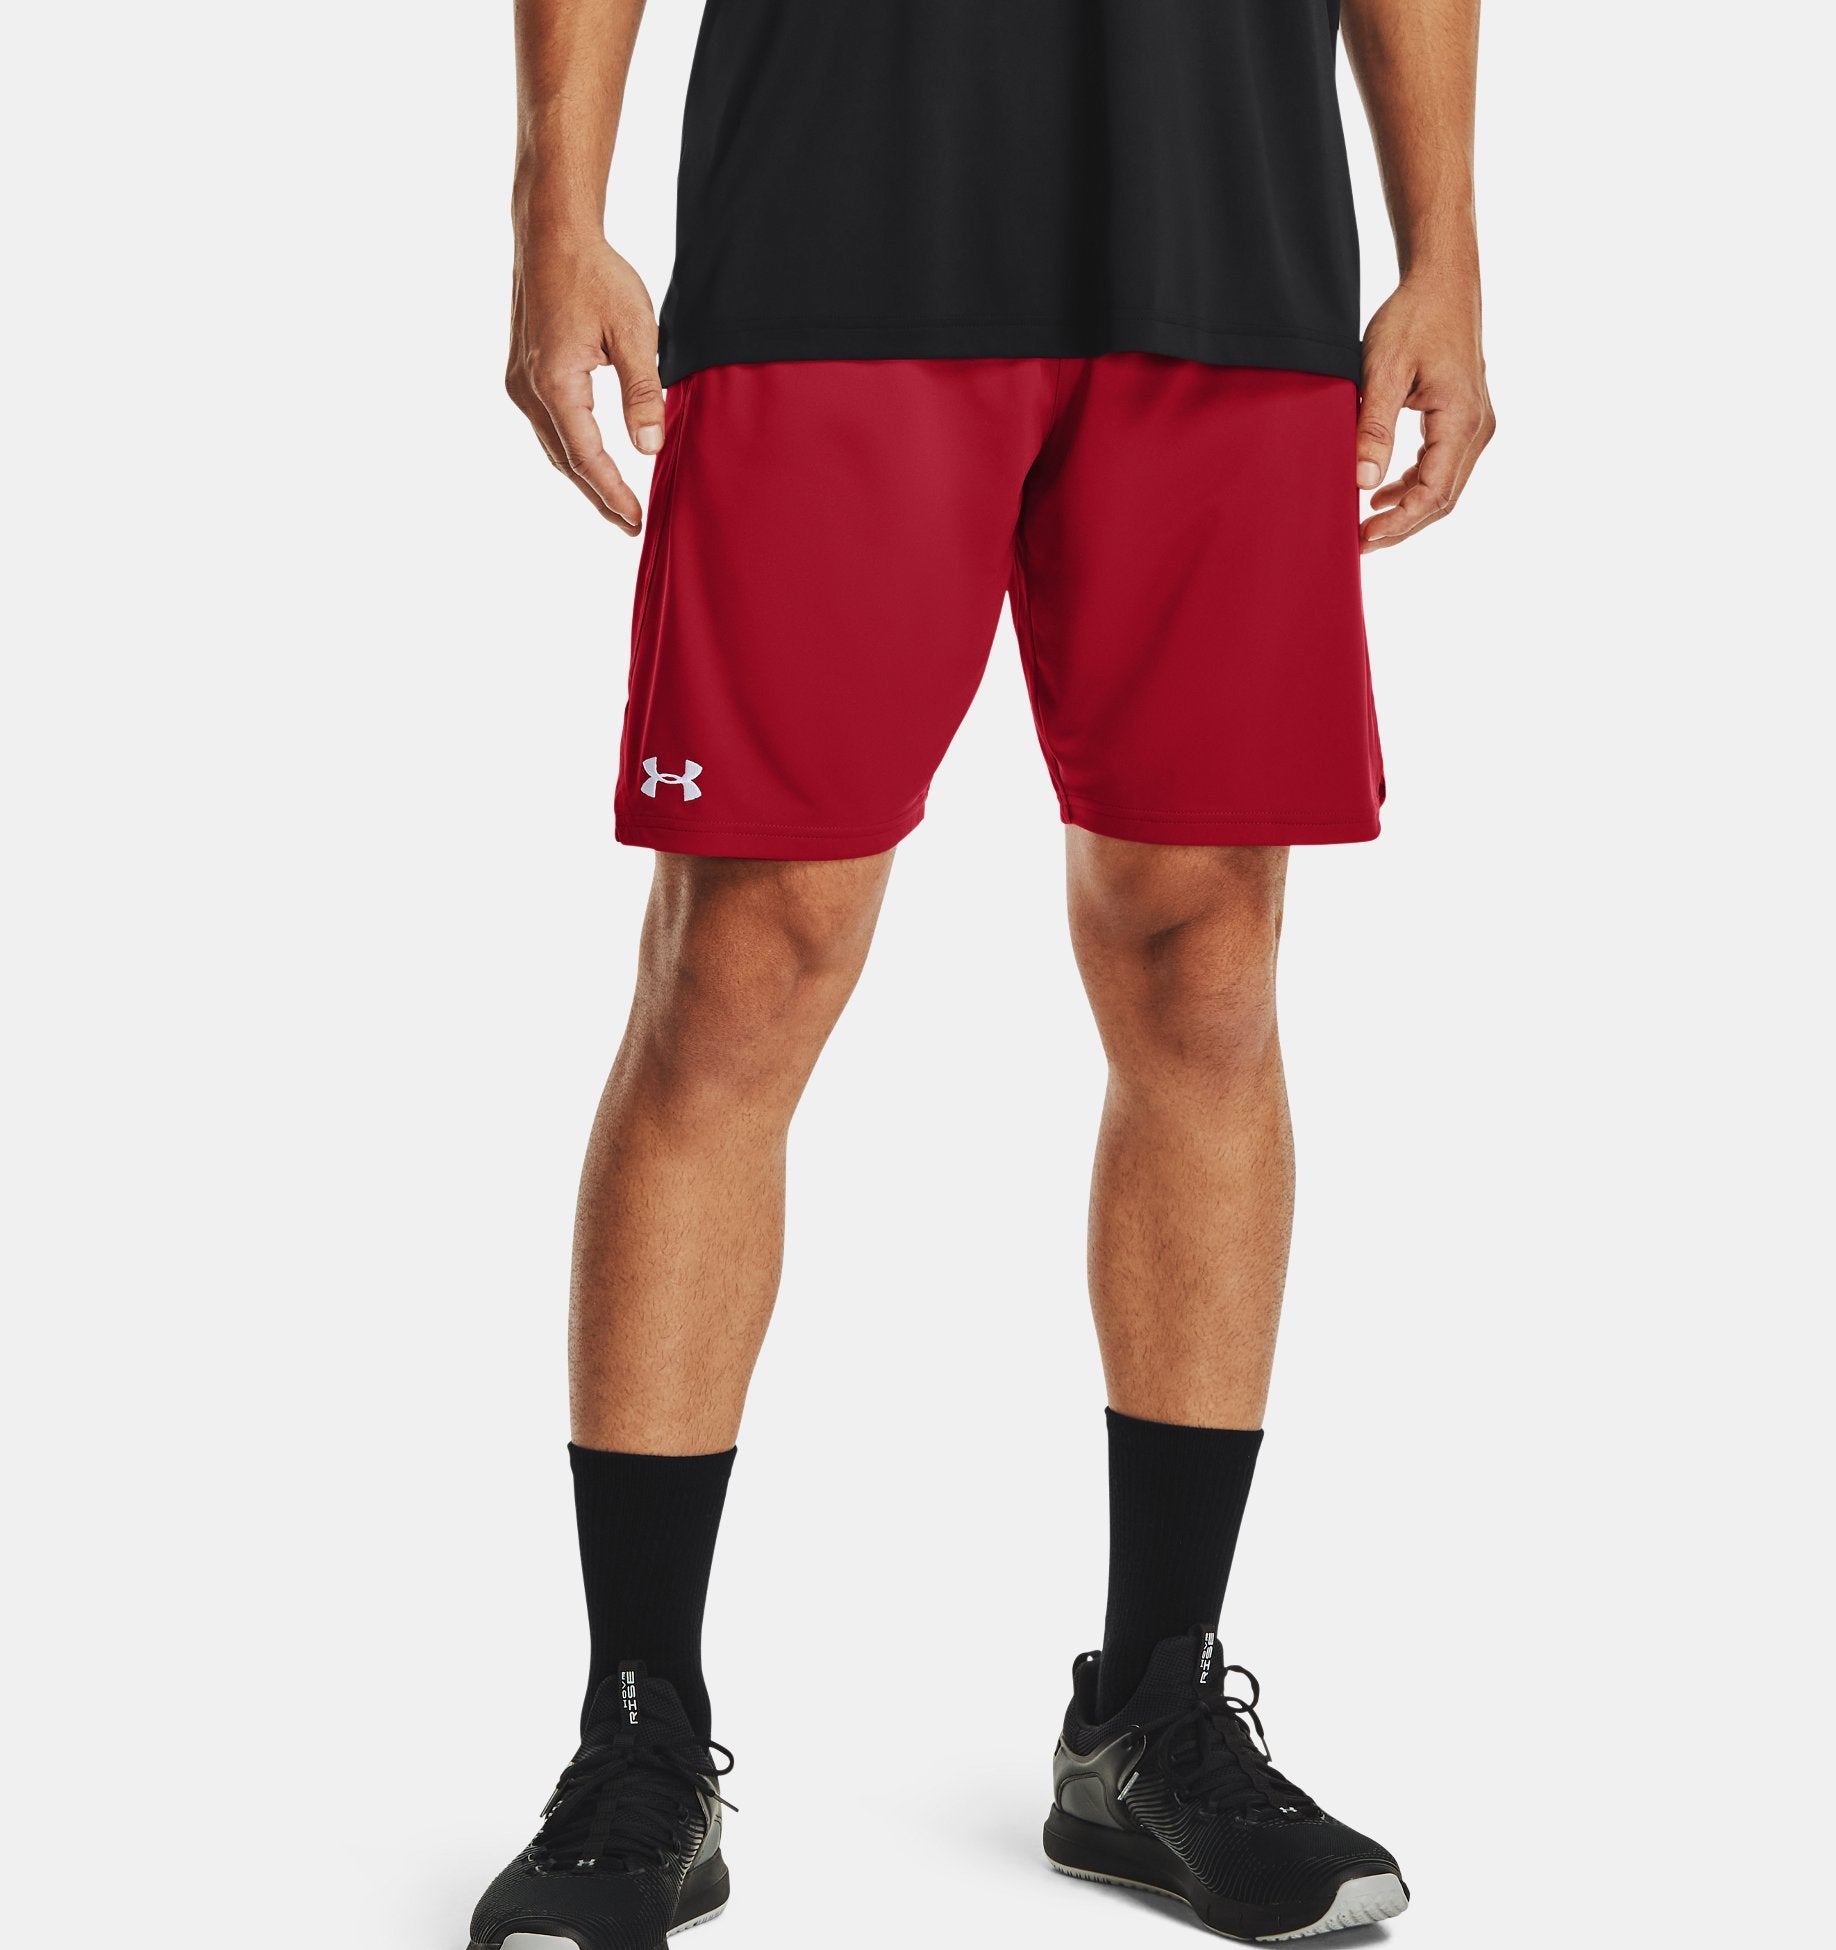 Under Armour Men's UA Locker 9" Pocketed Shorts (Red, XX-Large)